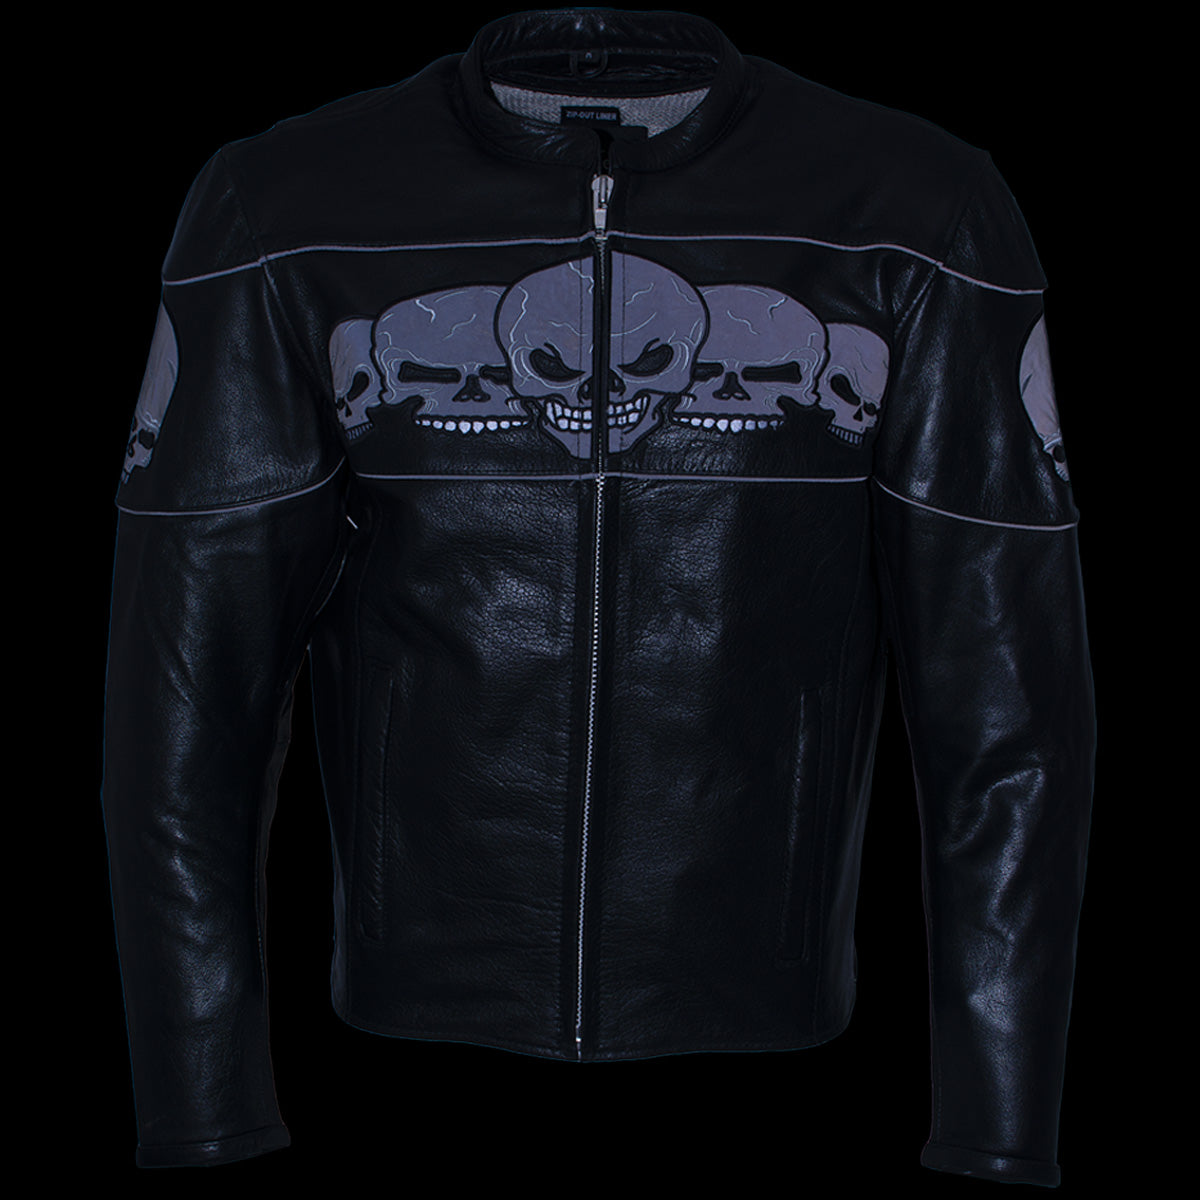 Xelement BXU6050 Men's '3 Skull Head' Black Leather Motorcycle Jacket with X-Armor Protection